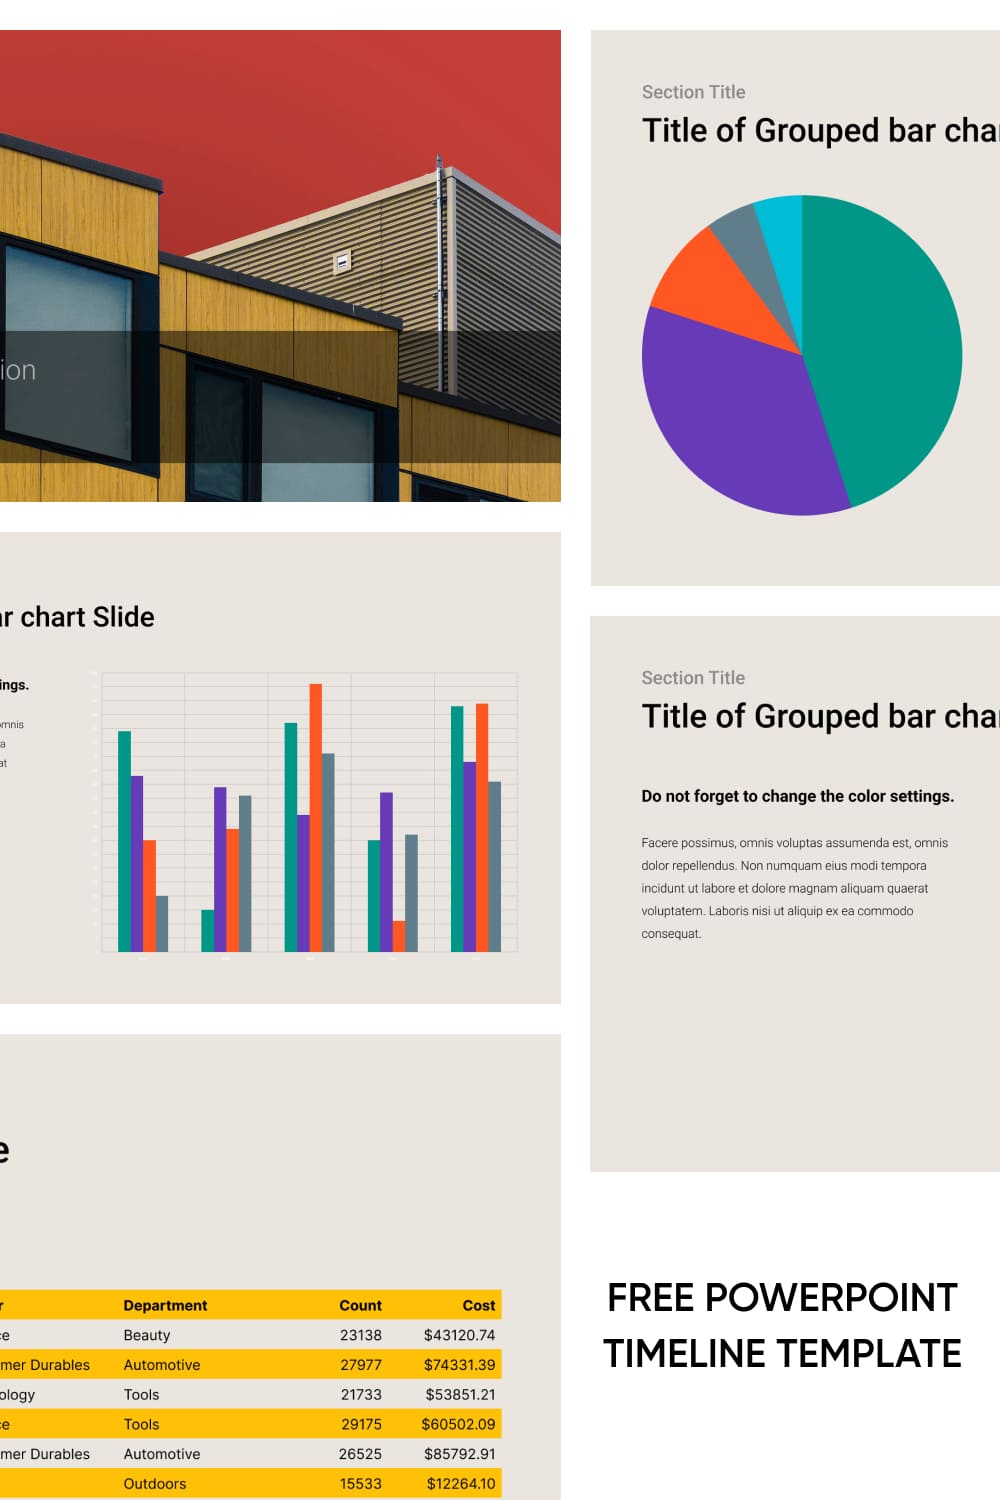 Pinterest of Powerpoint Timeline Template.